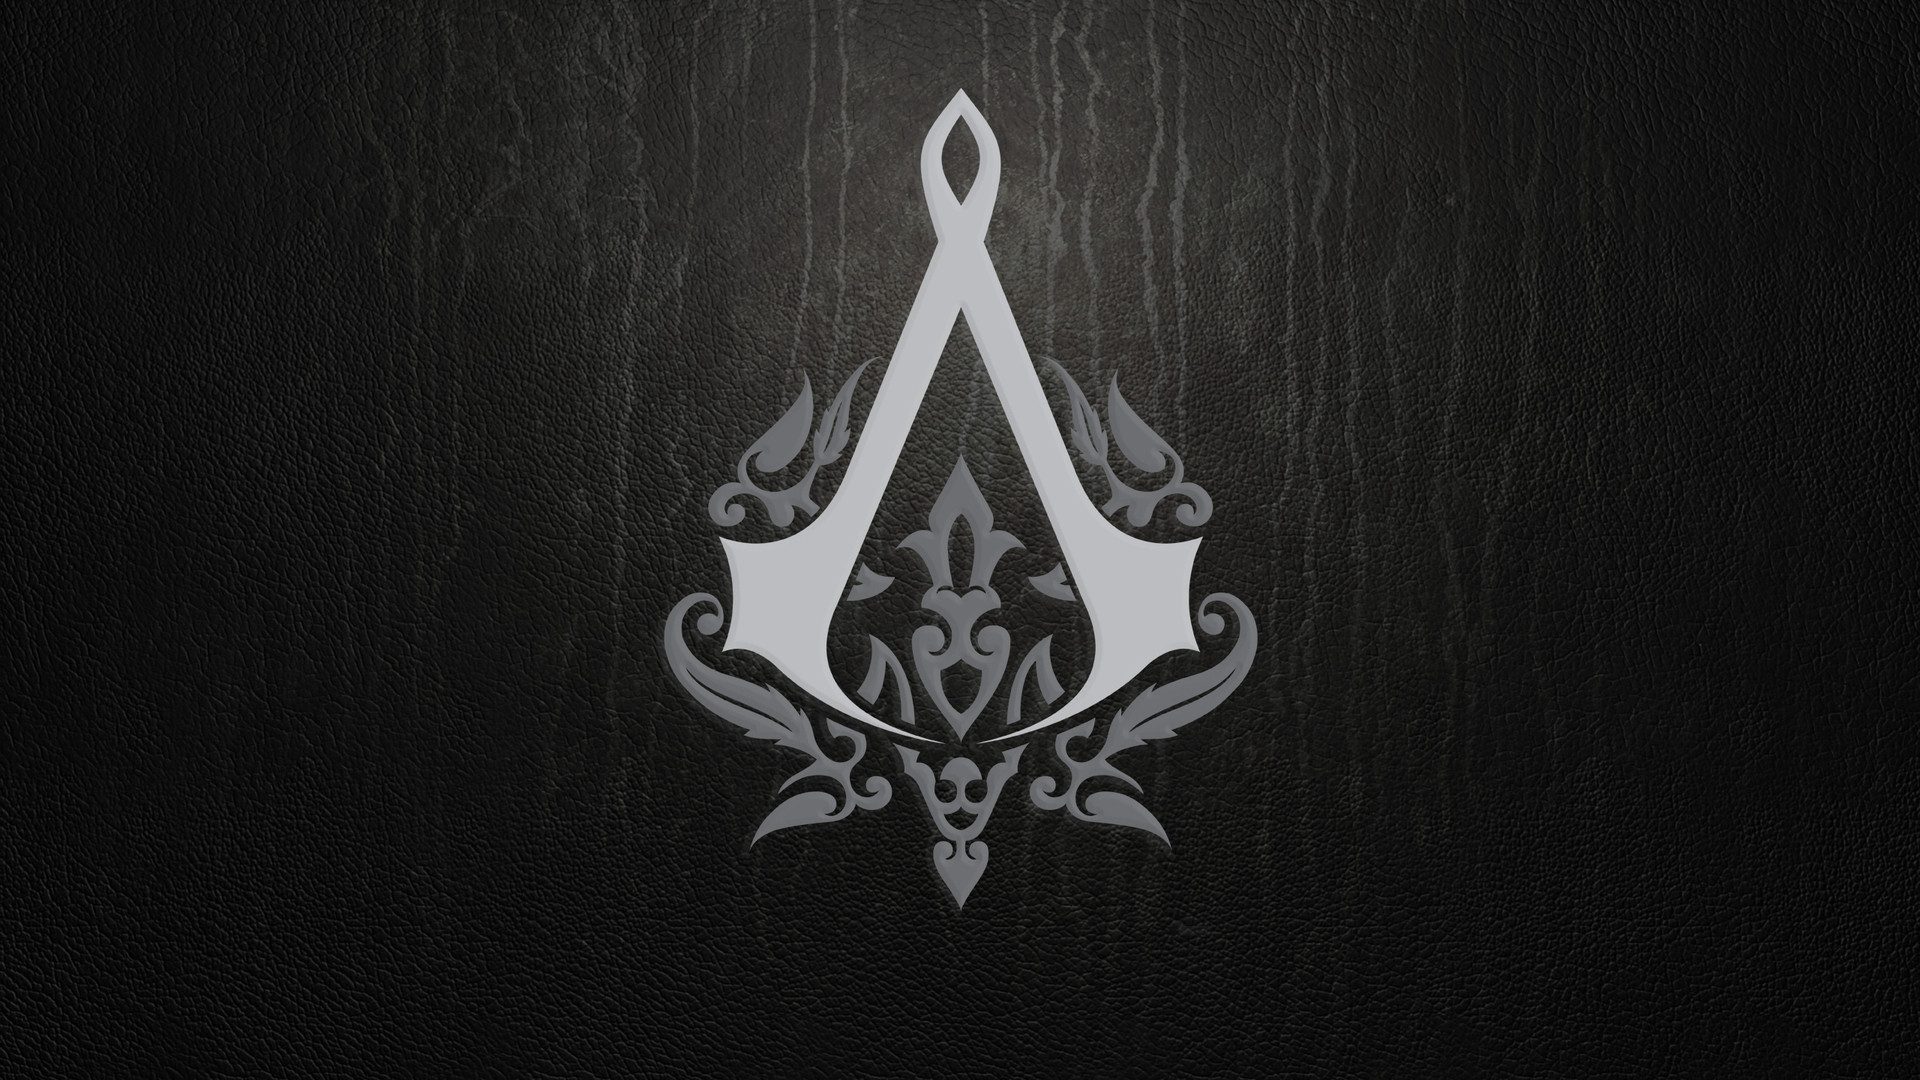 1920x1080 Users who found this page were searching for: wolf wappen wallpaper android  h d black logo wallpaper assassins creed symbol wallpaper android HD